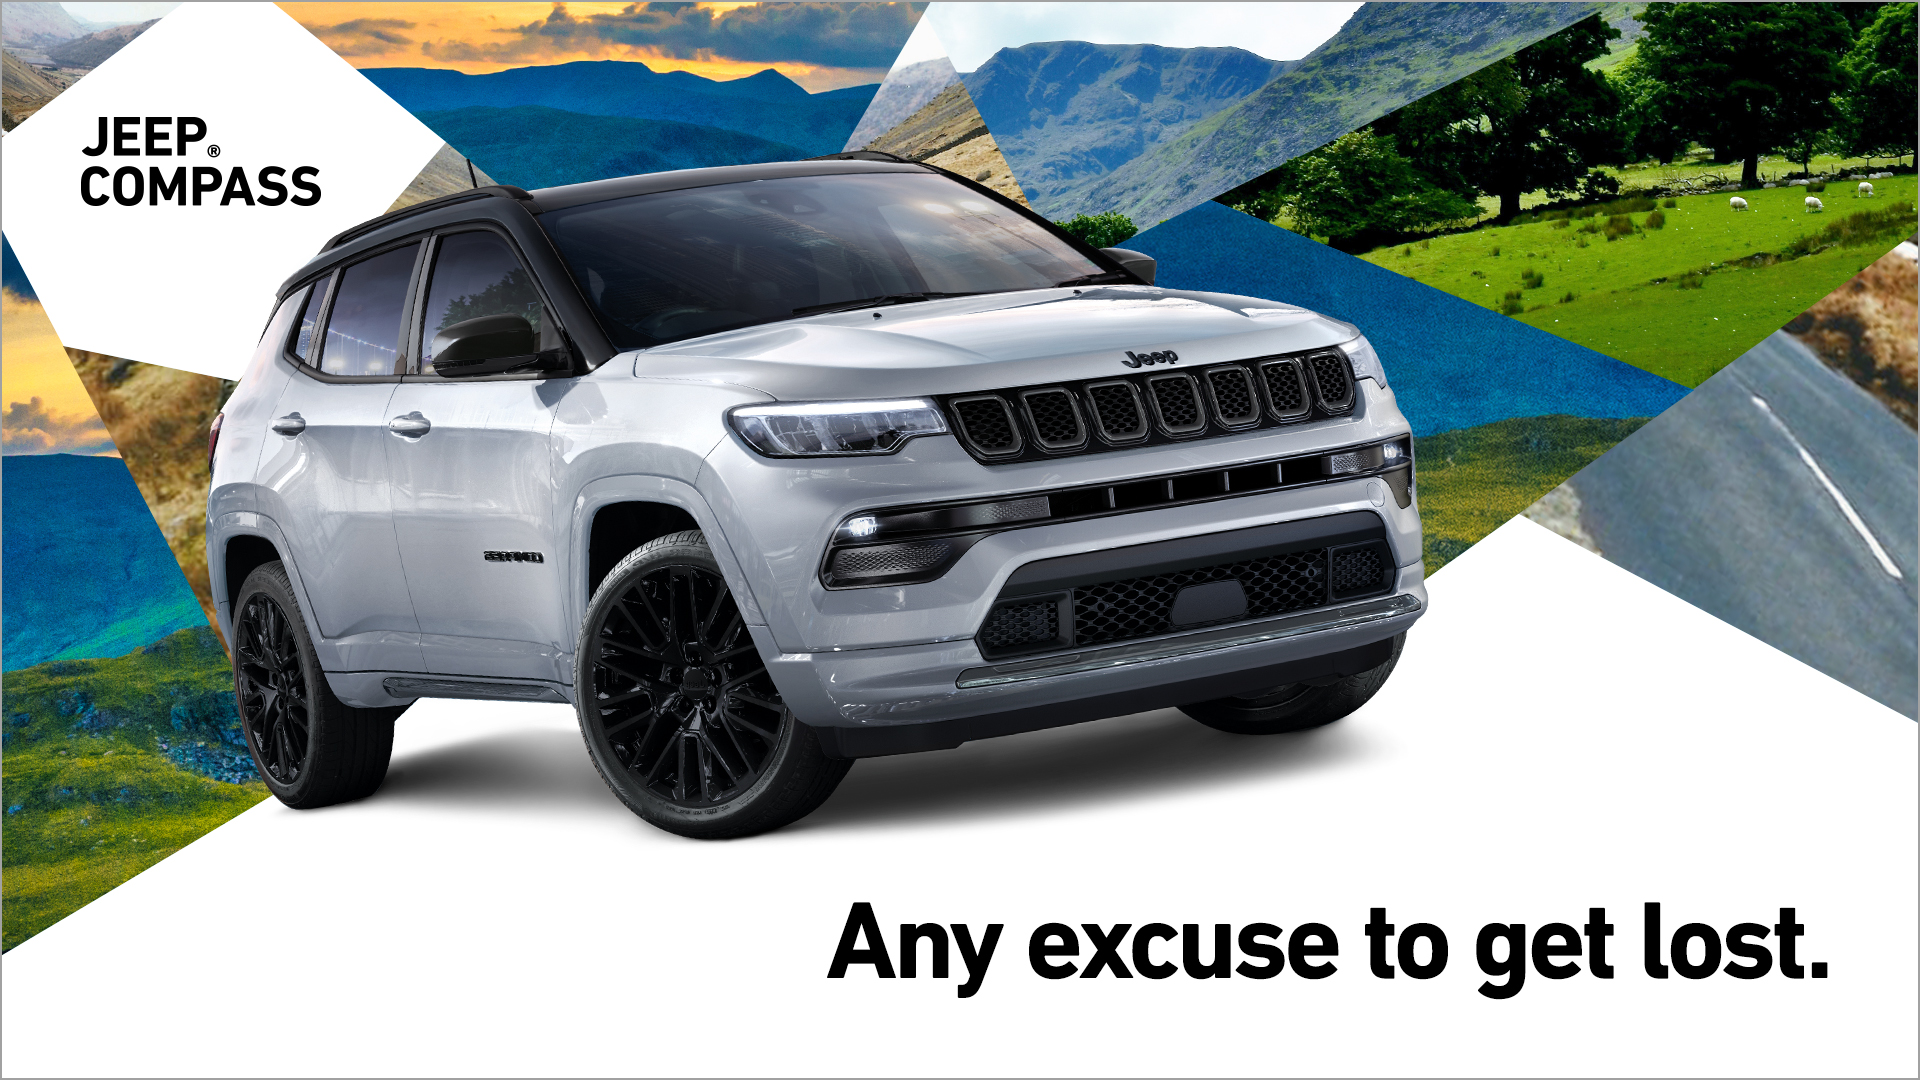 2022 Jeep Compass Parts & Accessories